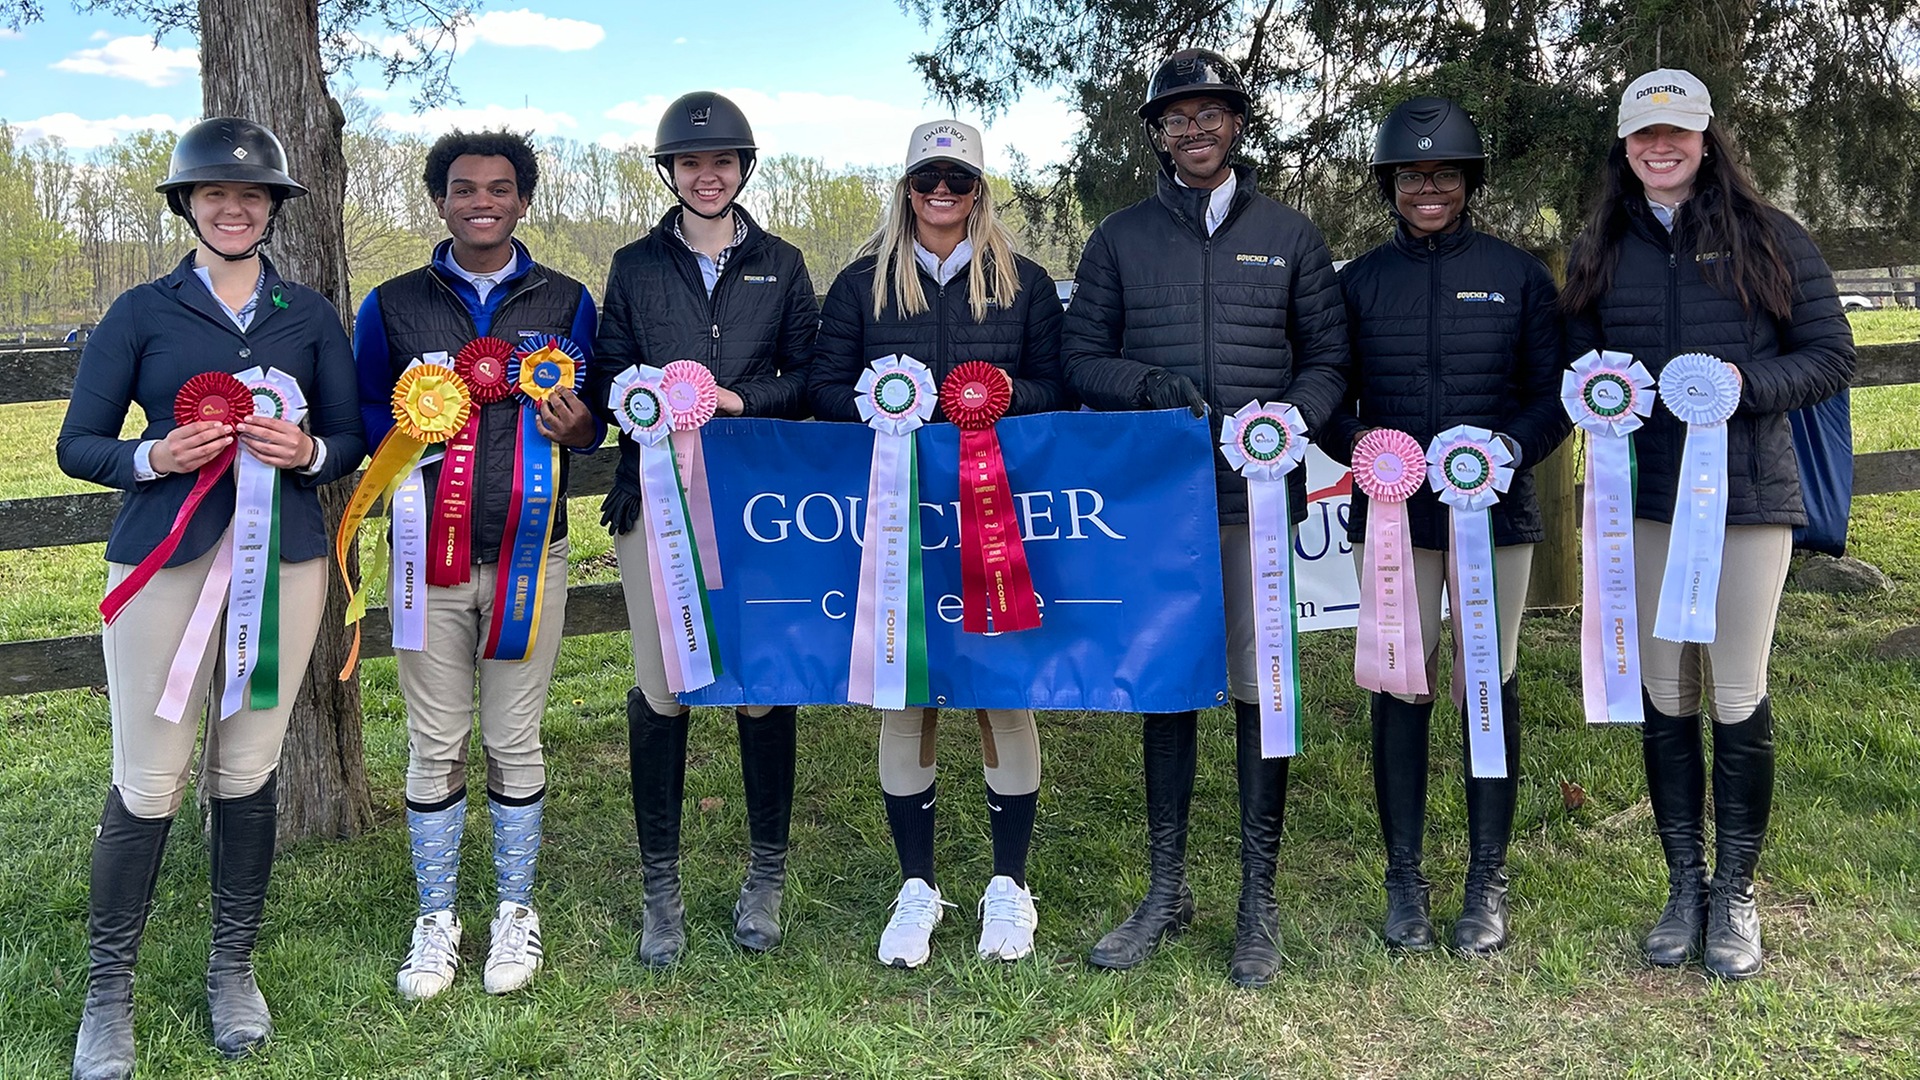 Jacob Connell Earns Nationals Berth, Equestrian Fourth at Zone IV Championship